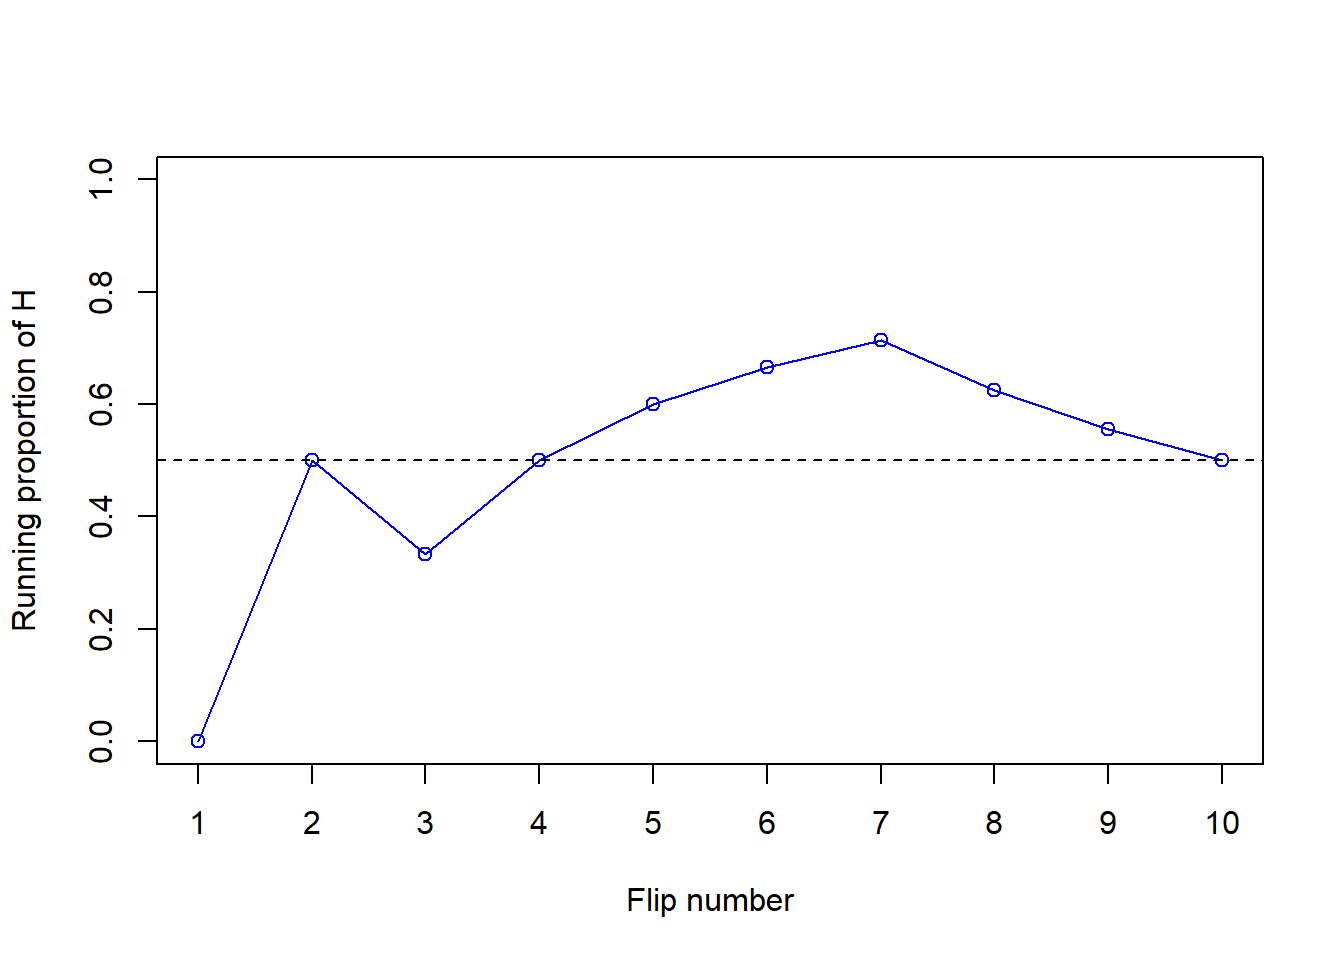 Running proportion of H versus number of flips for the 10 coin flips in Table 3.1.